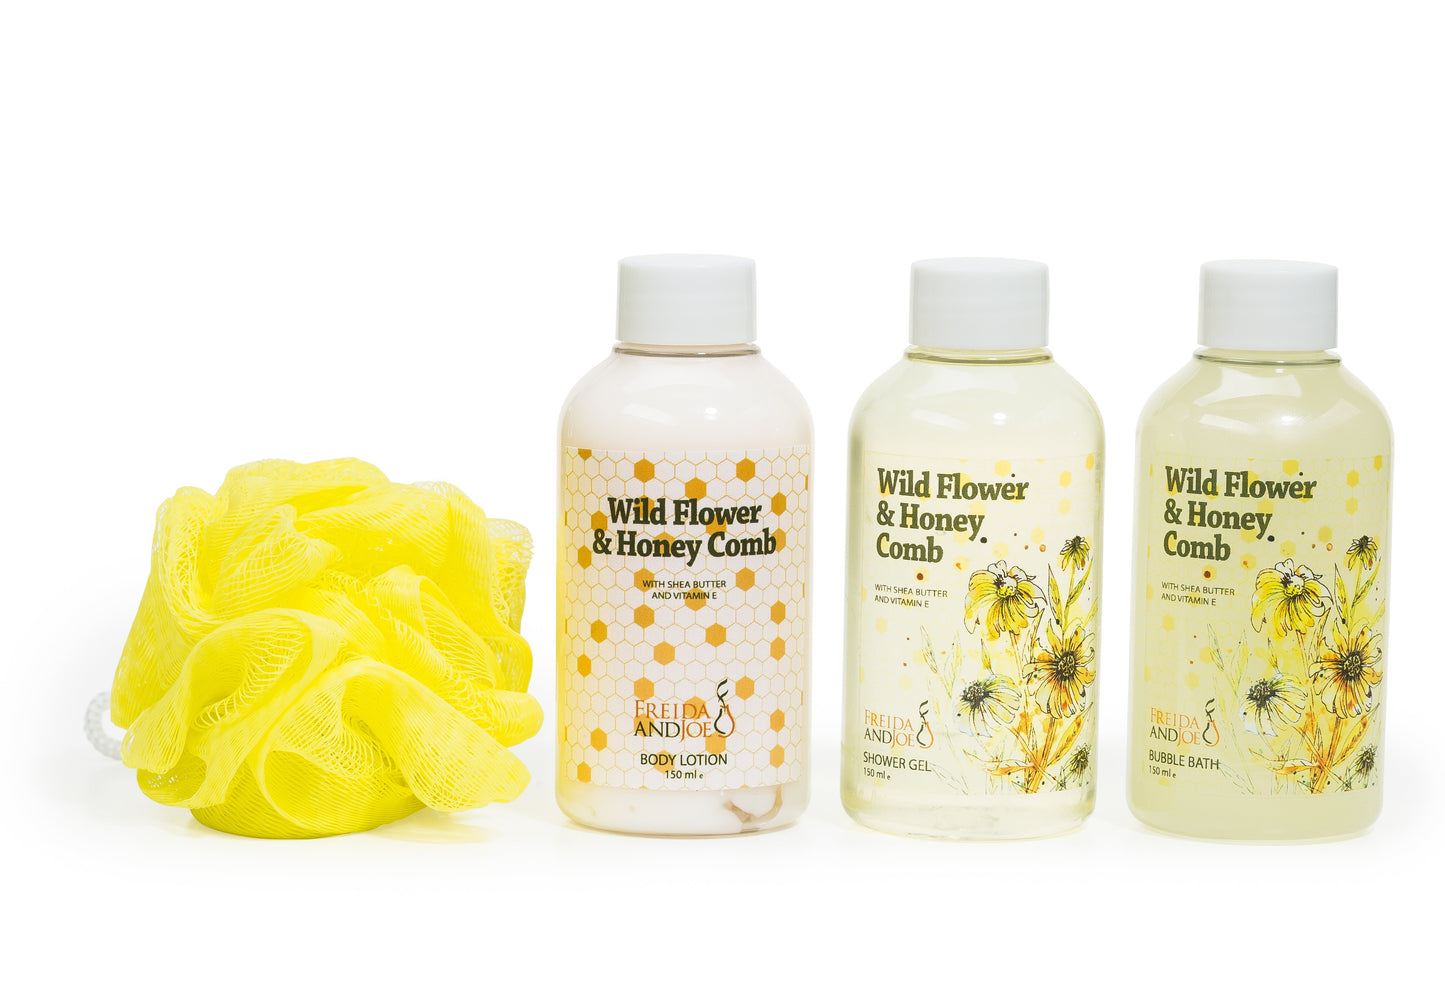 Wild Flower and Honey Comb Spa Gift Set: Shower Gel, Bubble Bath, Body Lotion, & Puff